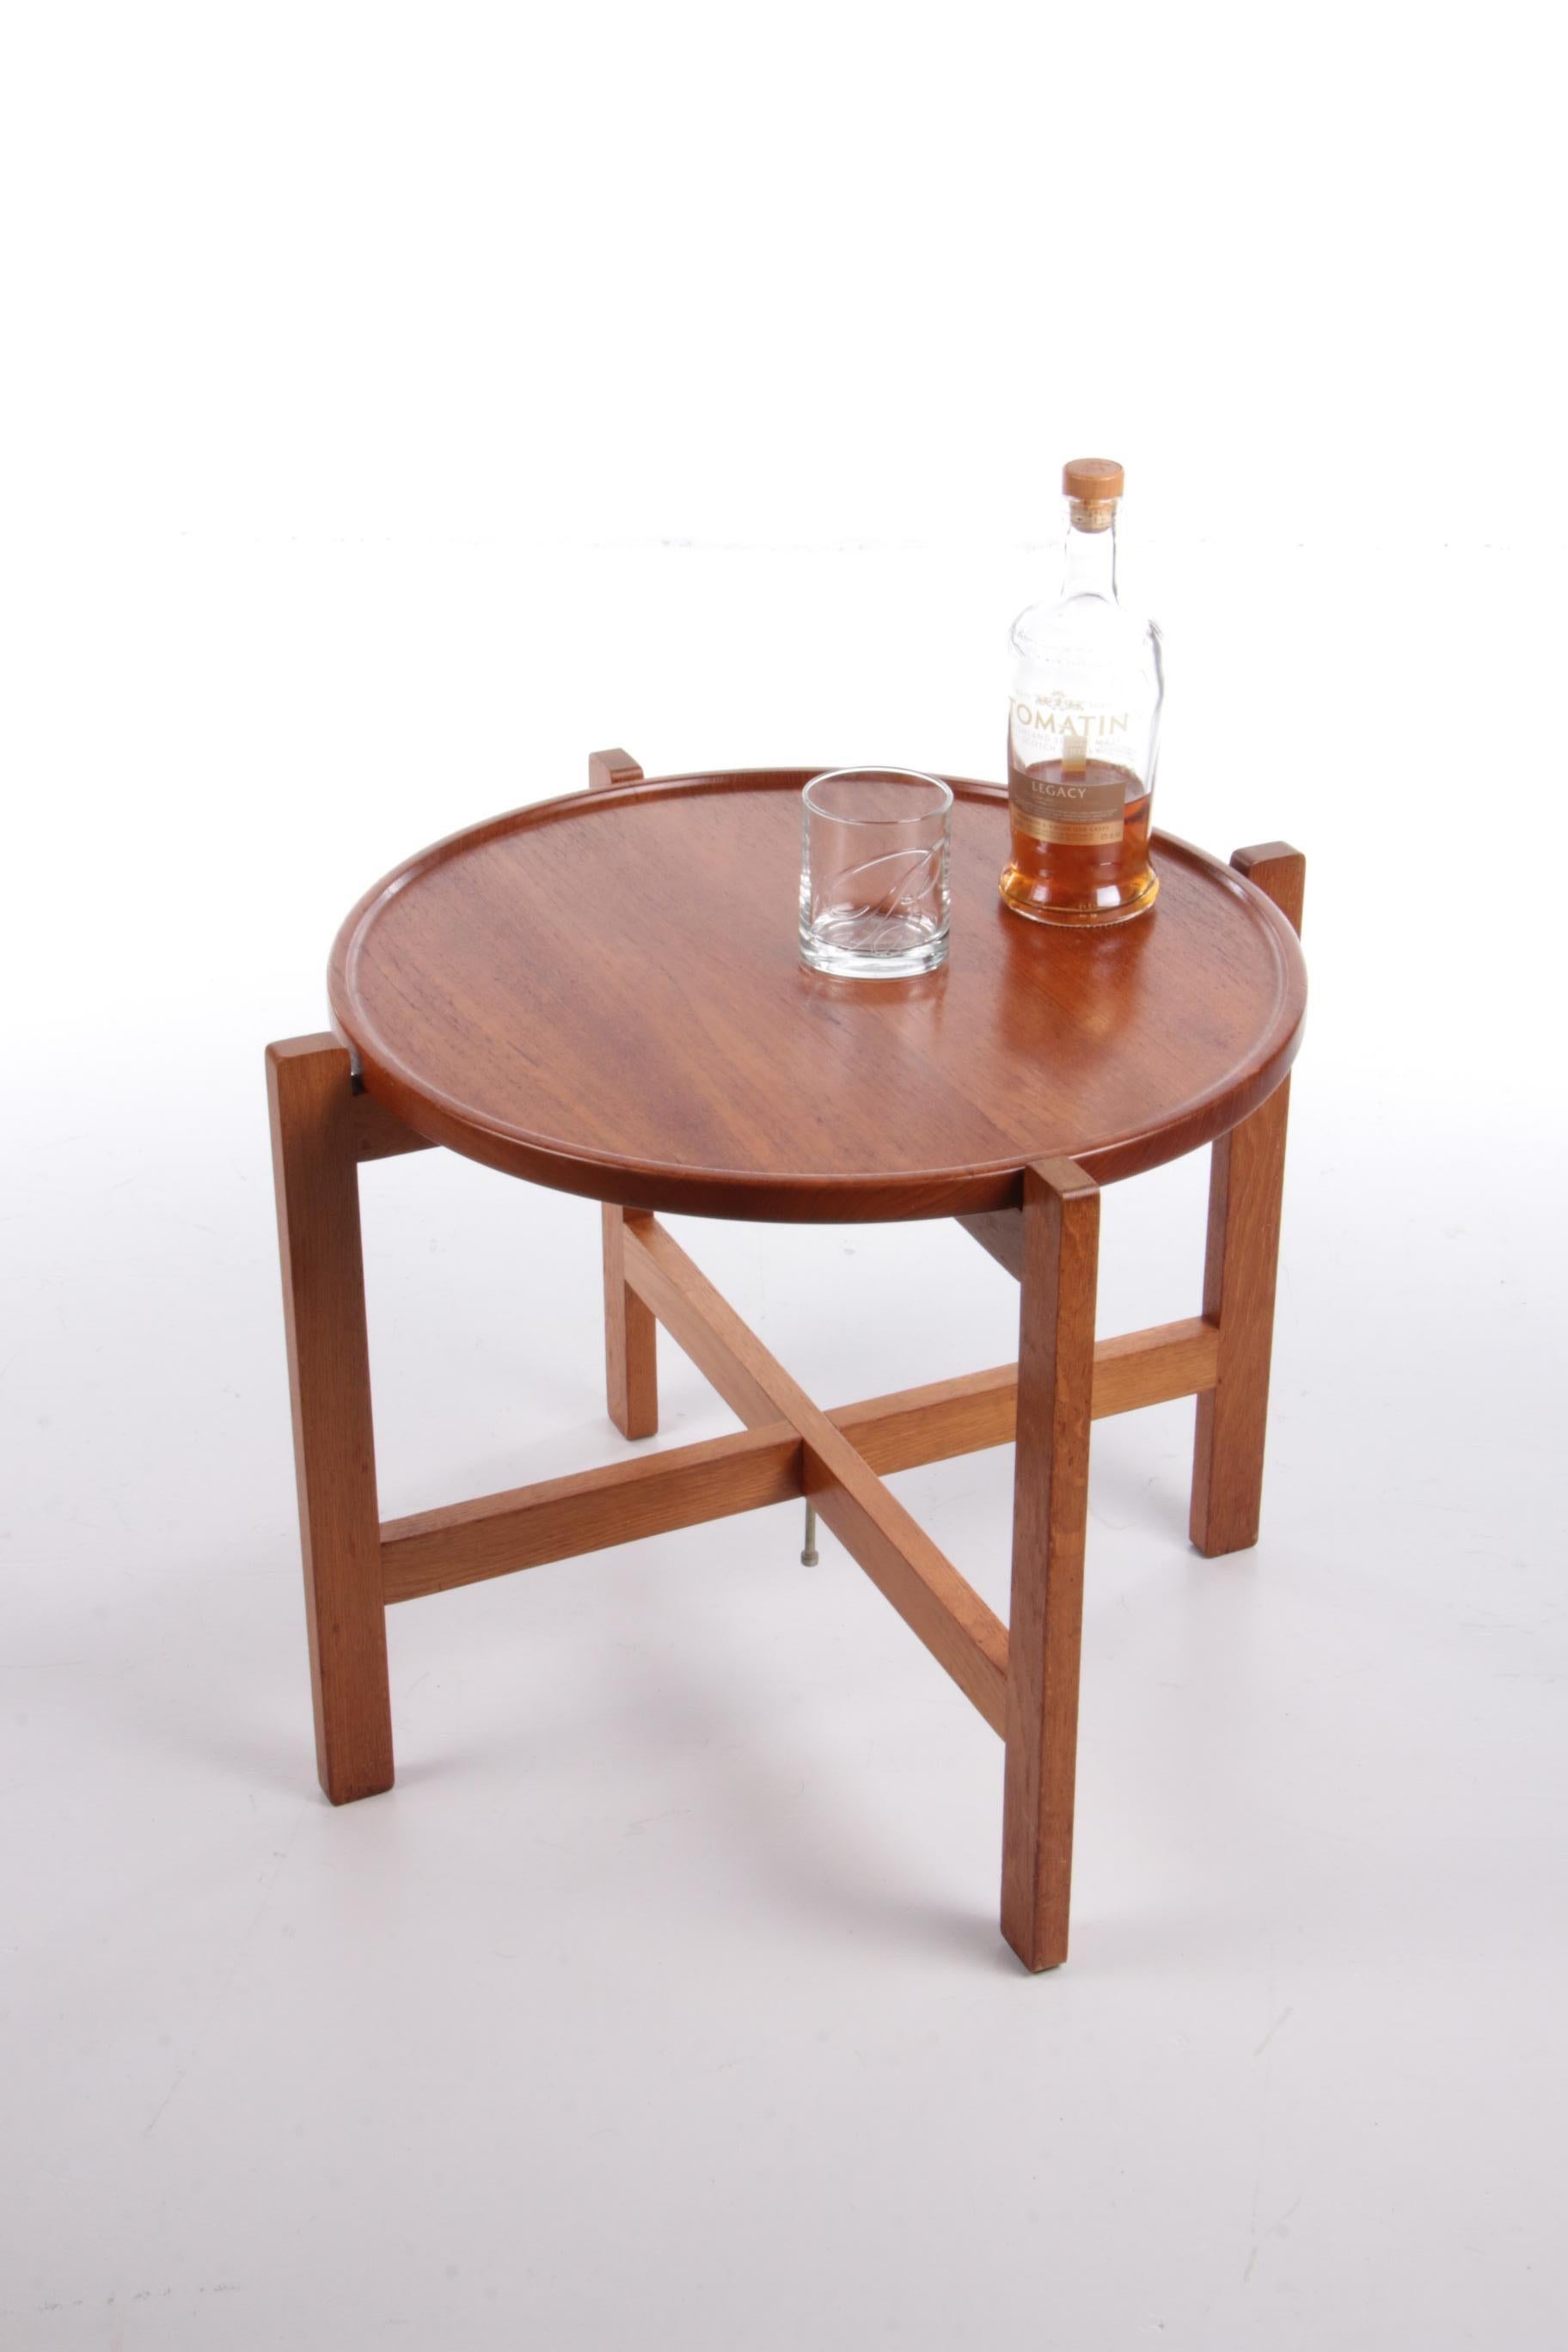 Side table Model AT35 design by Hans J. Wegner,1945 Denmark


Side table model AT35 designed by Hans J. Wegner in 1945 for Andreas Tuck.

This is a very early model and belongs to the first editions of the well-known designer.

The table has the